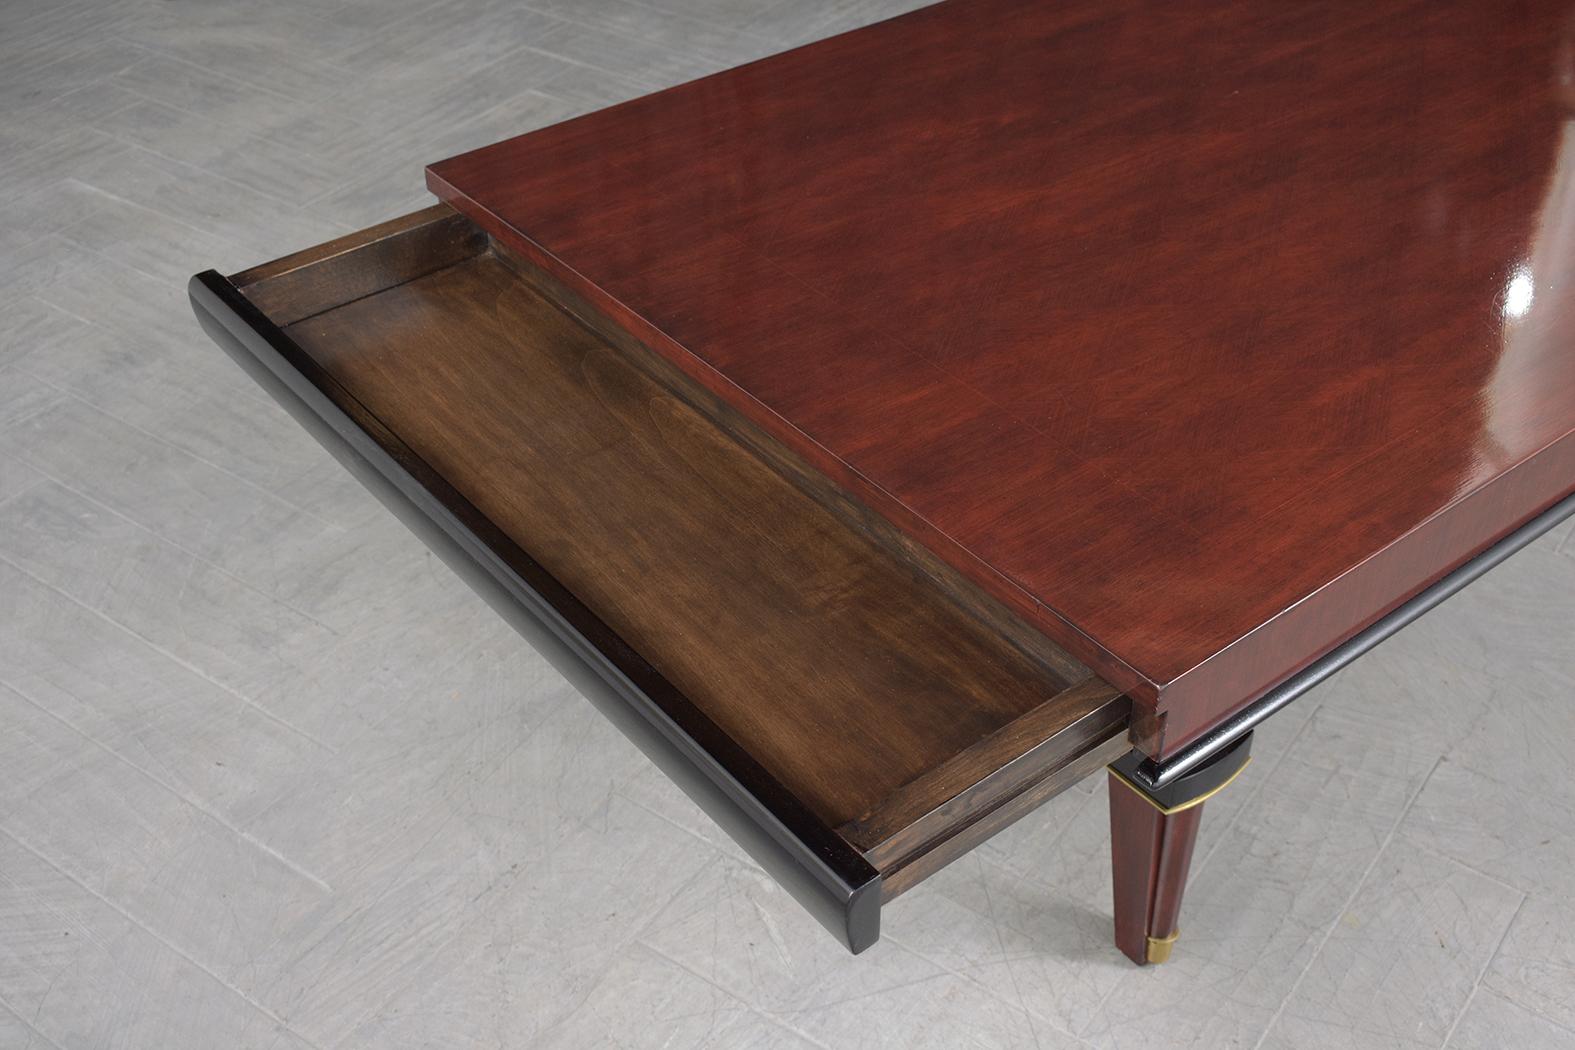 Lacquered 1960s French Executive Desk: Art Deco Mahogany Design with Ebonized Accents